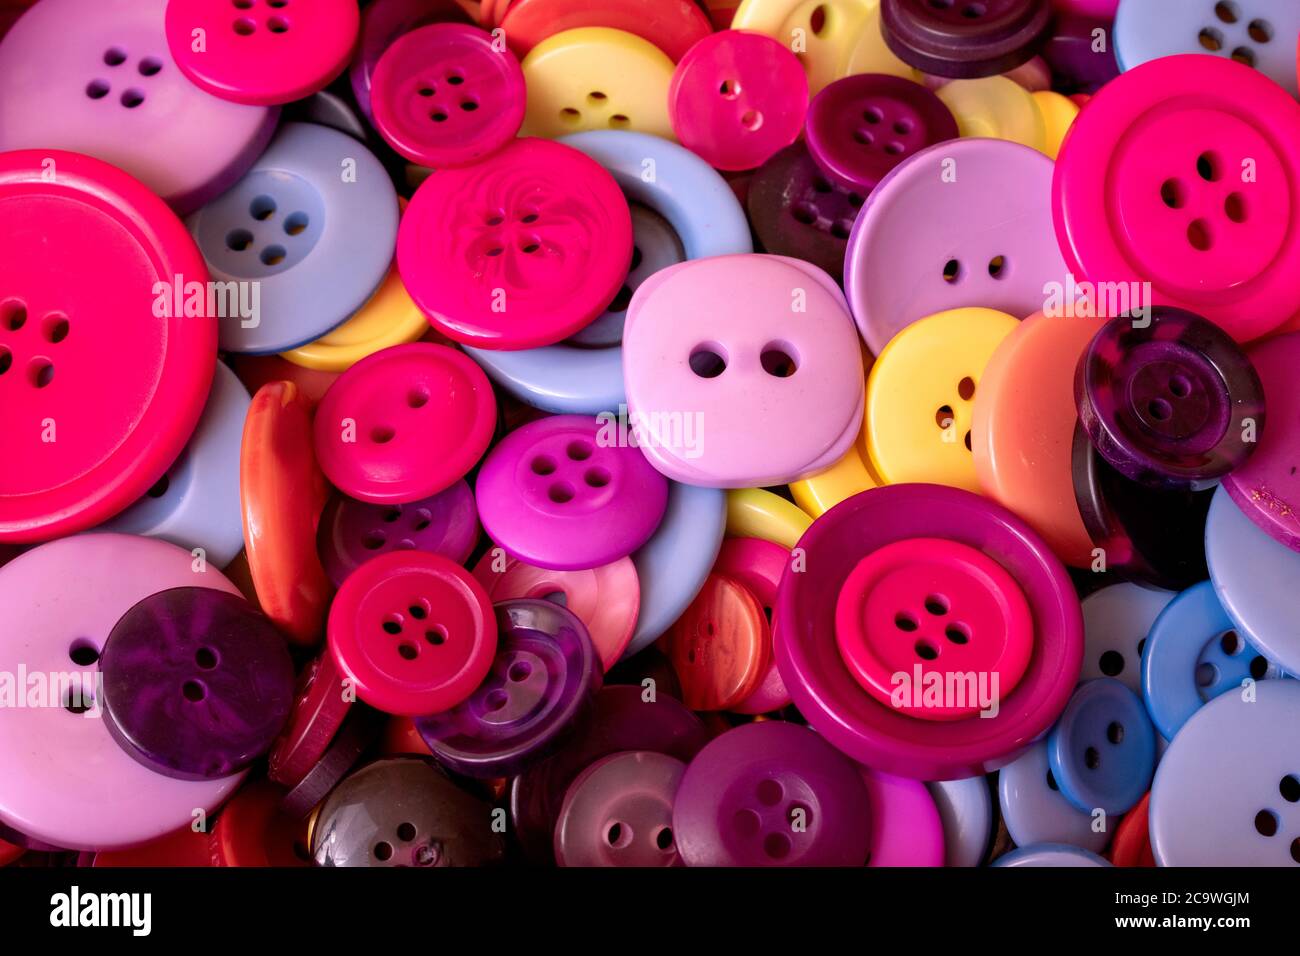 Colorful button background Stock Photo